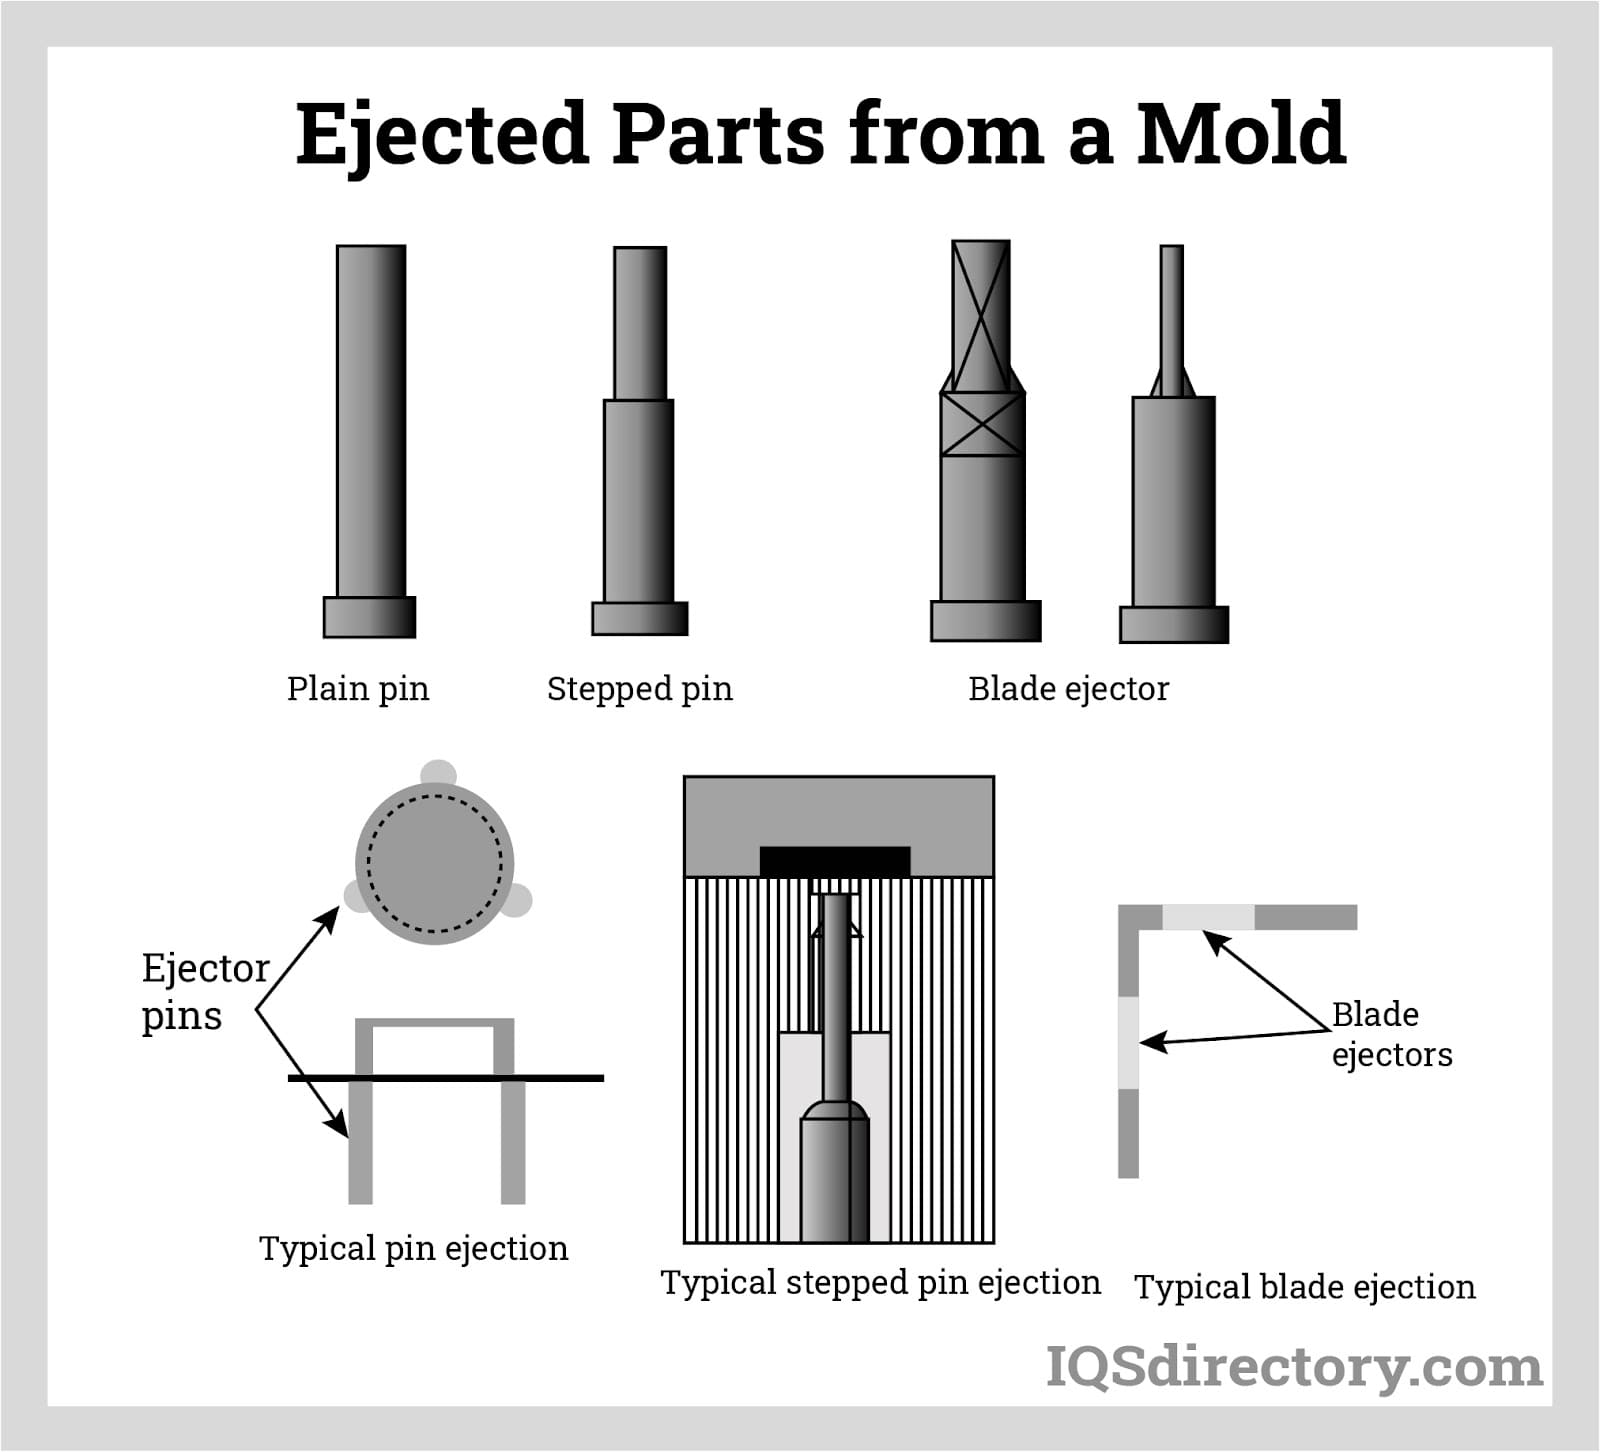 Ejected Parts from a Mold